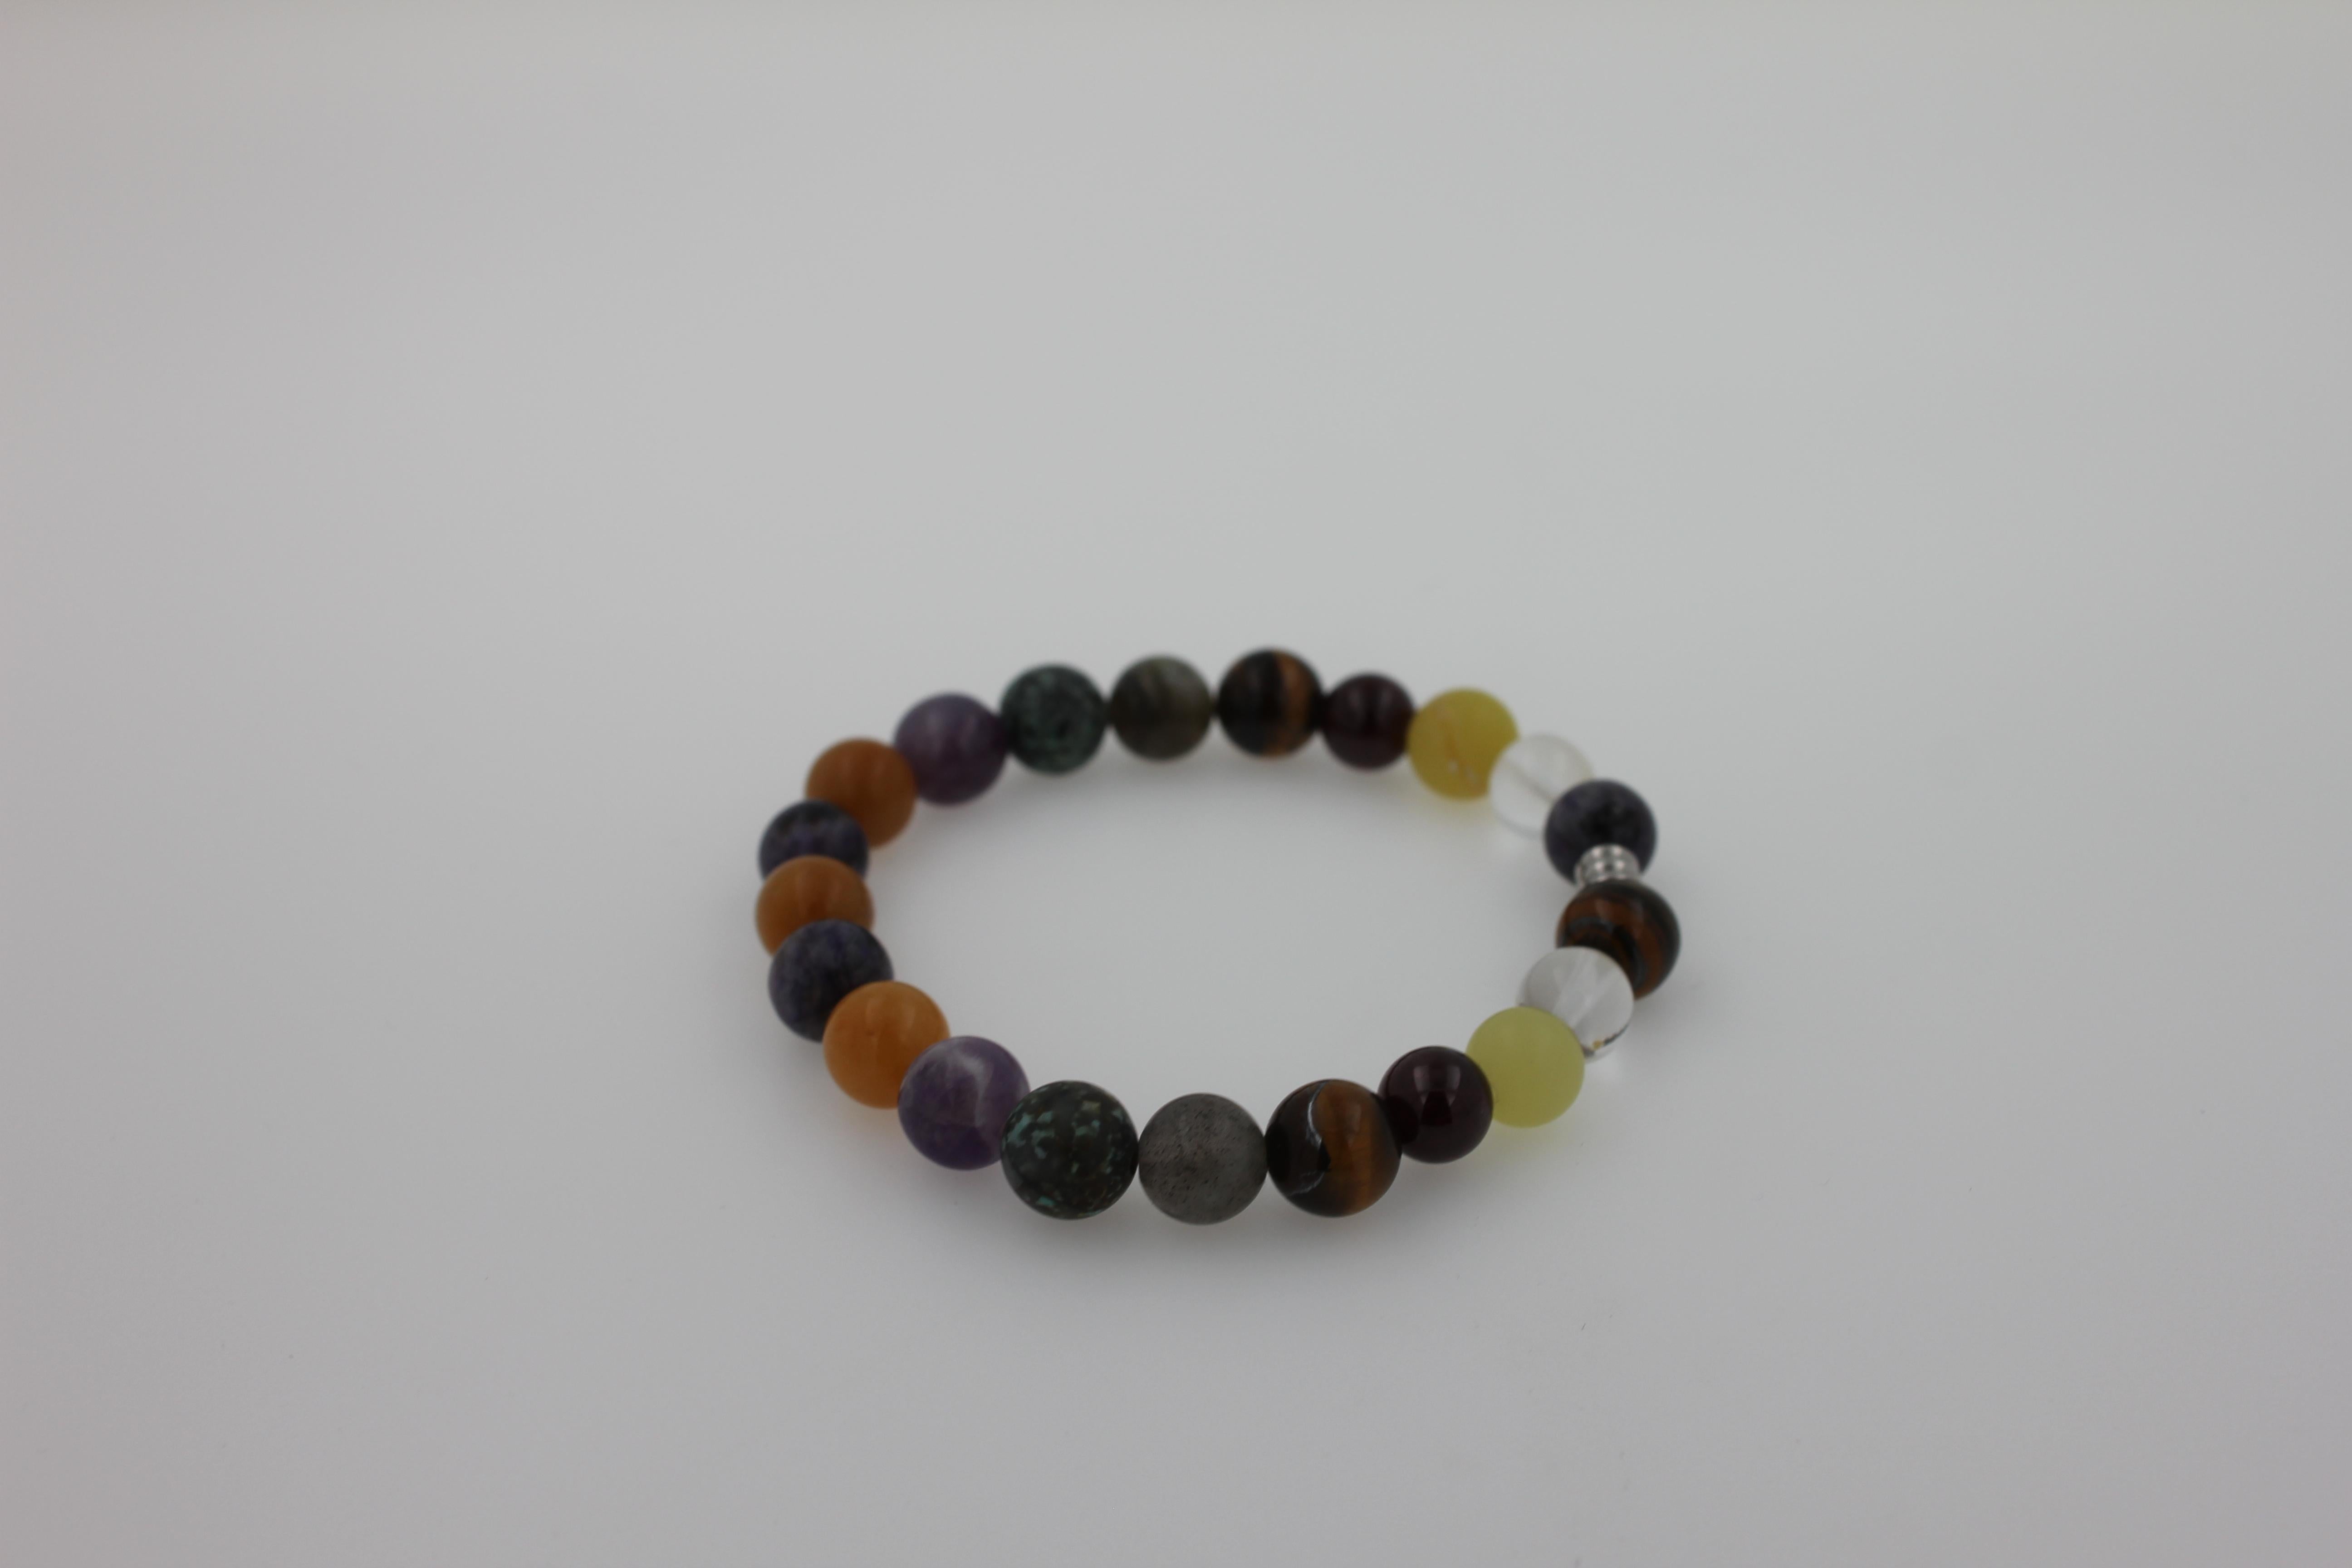 Multi Color Earth Gemstone Round Chakra Beads Stretchy Unique Statement Bracelet
Size of Bracelet - Fits Wrist Sizes of 6-9 Inches (Flexible Stretching Wire)
Natural, Genuine Gemstones